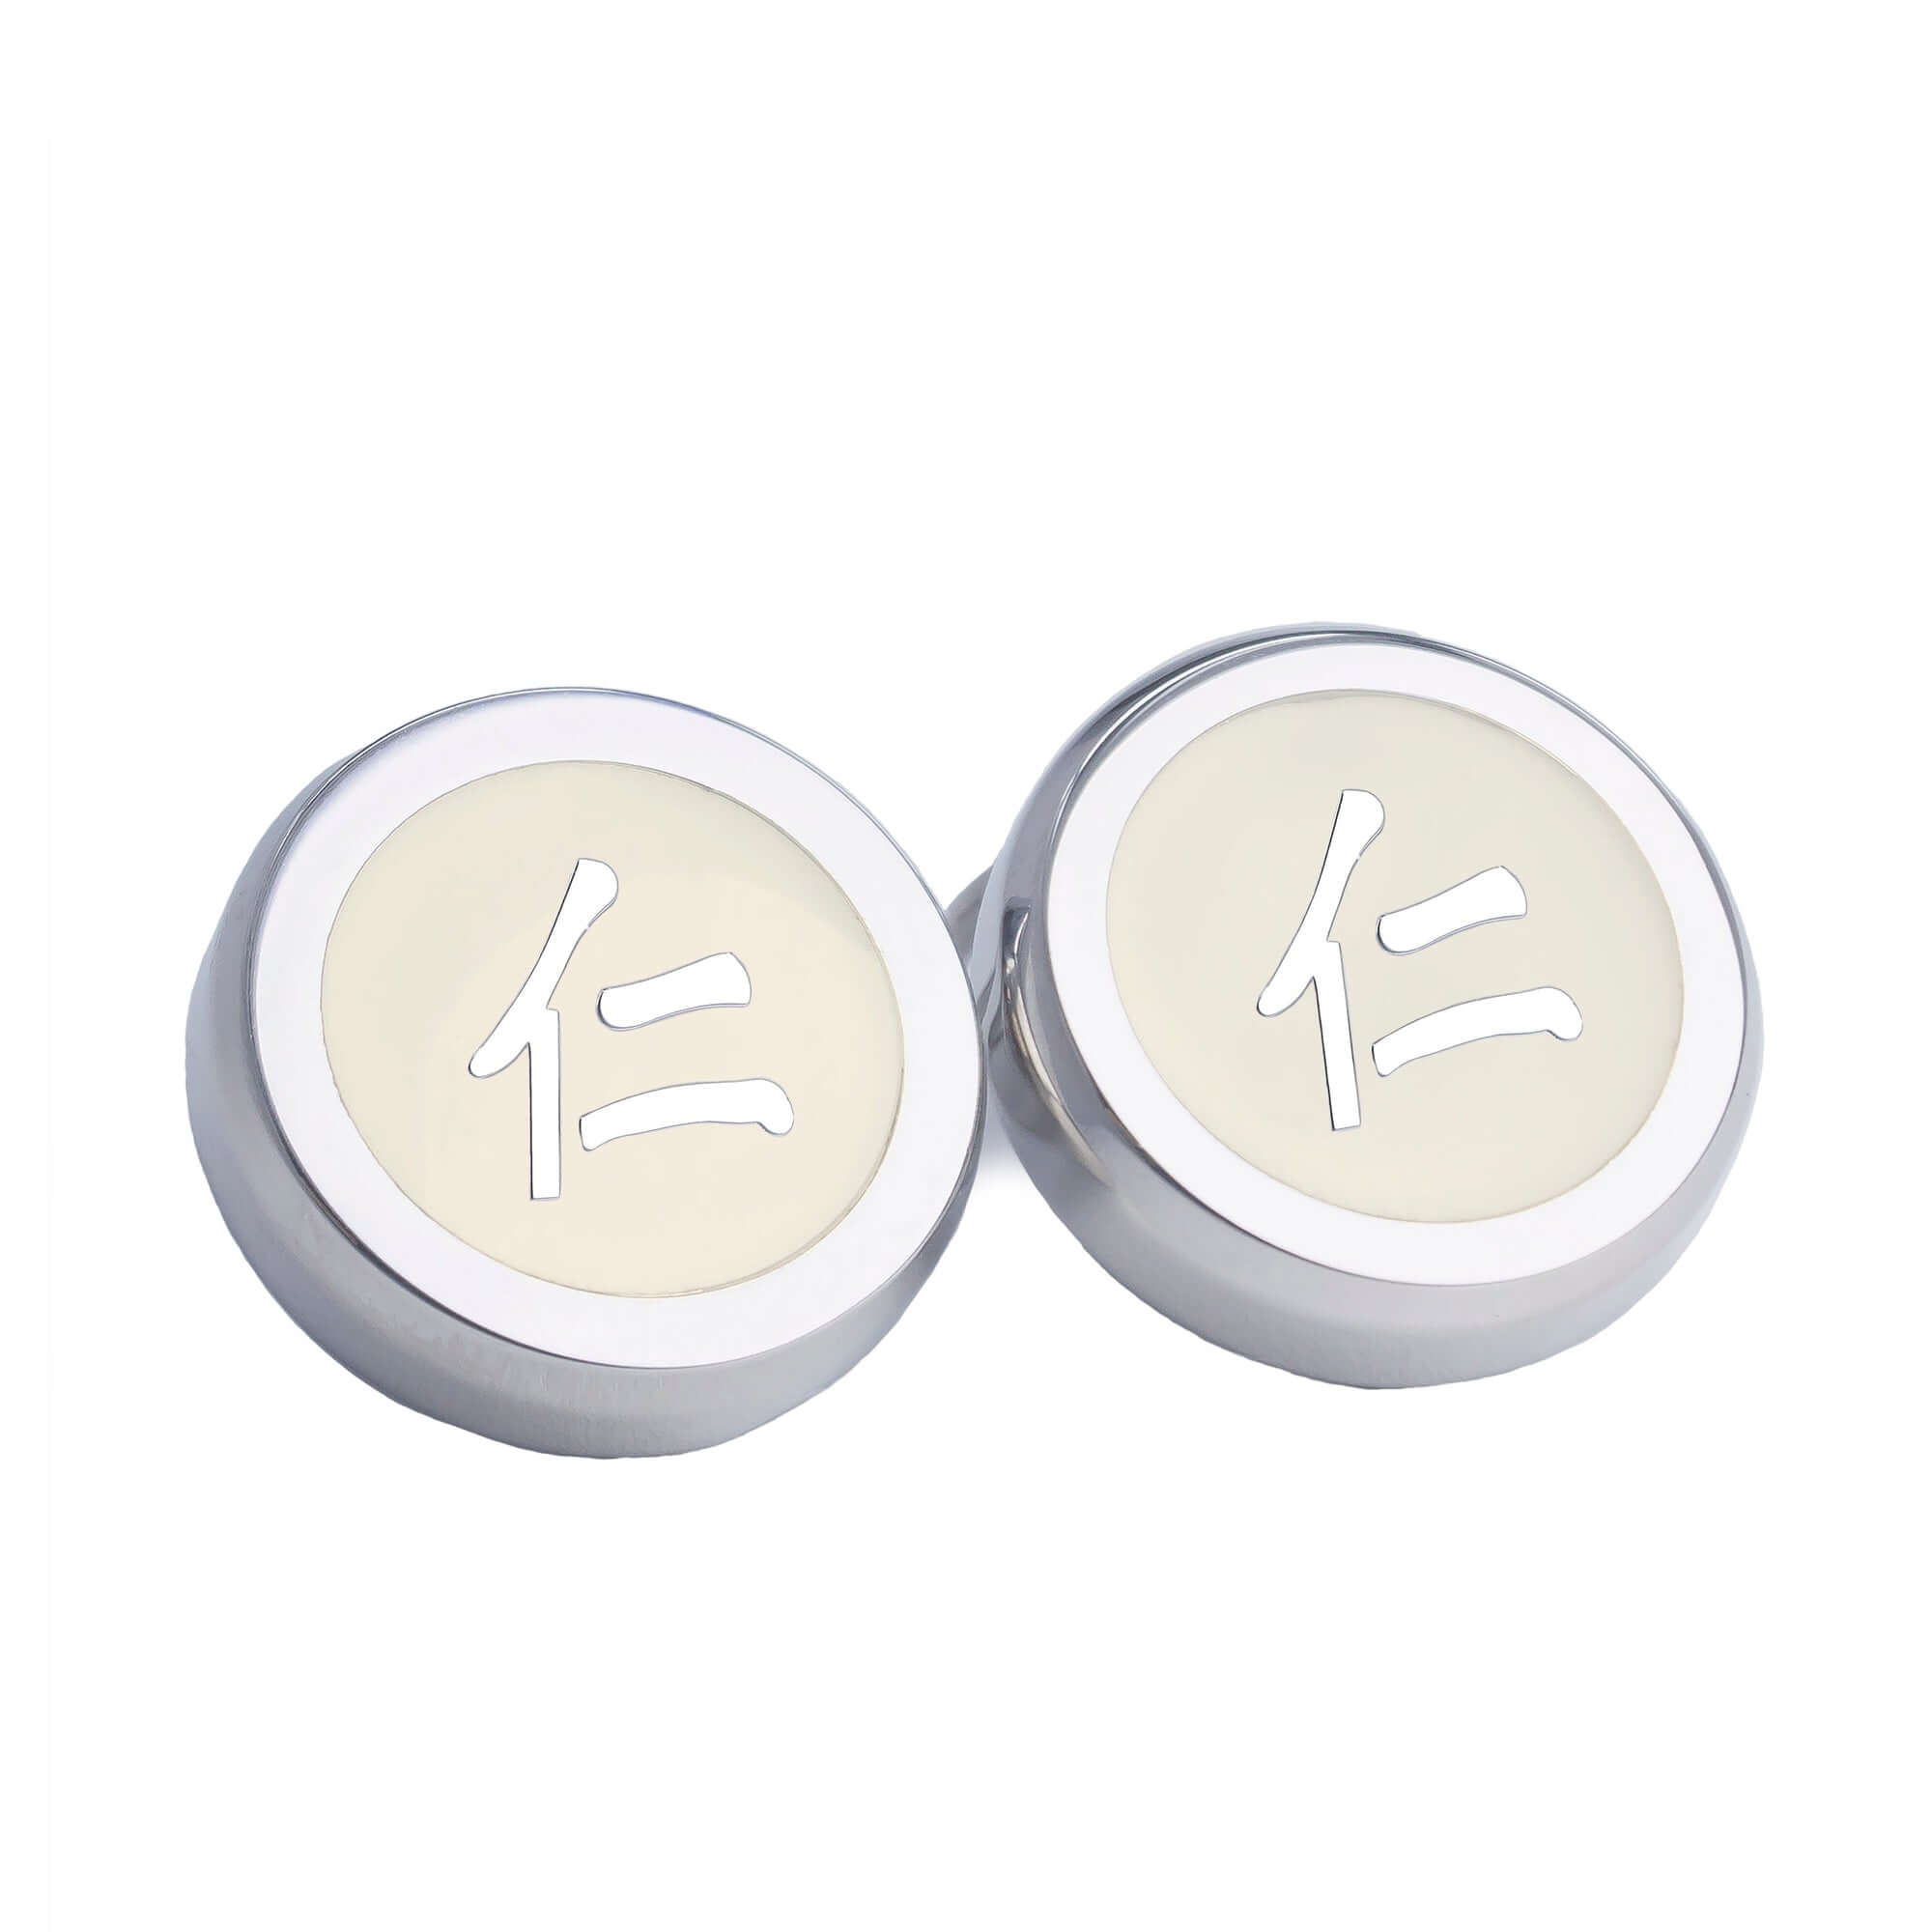 Chinese Character Silver Button Covers-Button Covers-A.Azthom-仁 Ren3-Cufflinks.com.sg